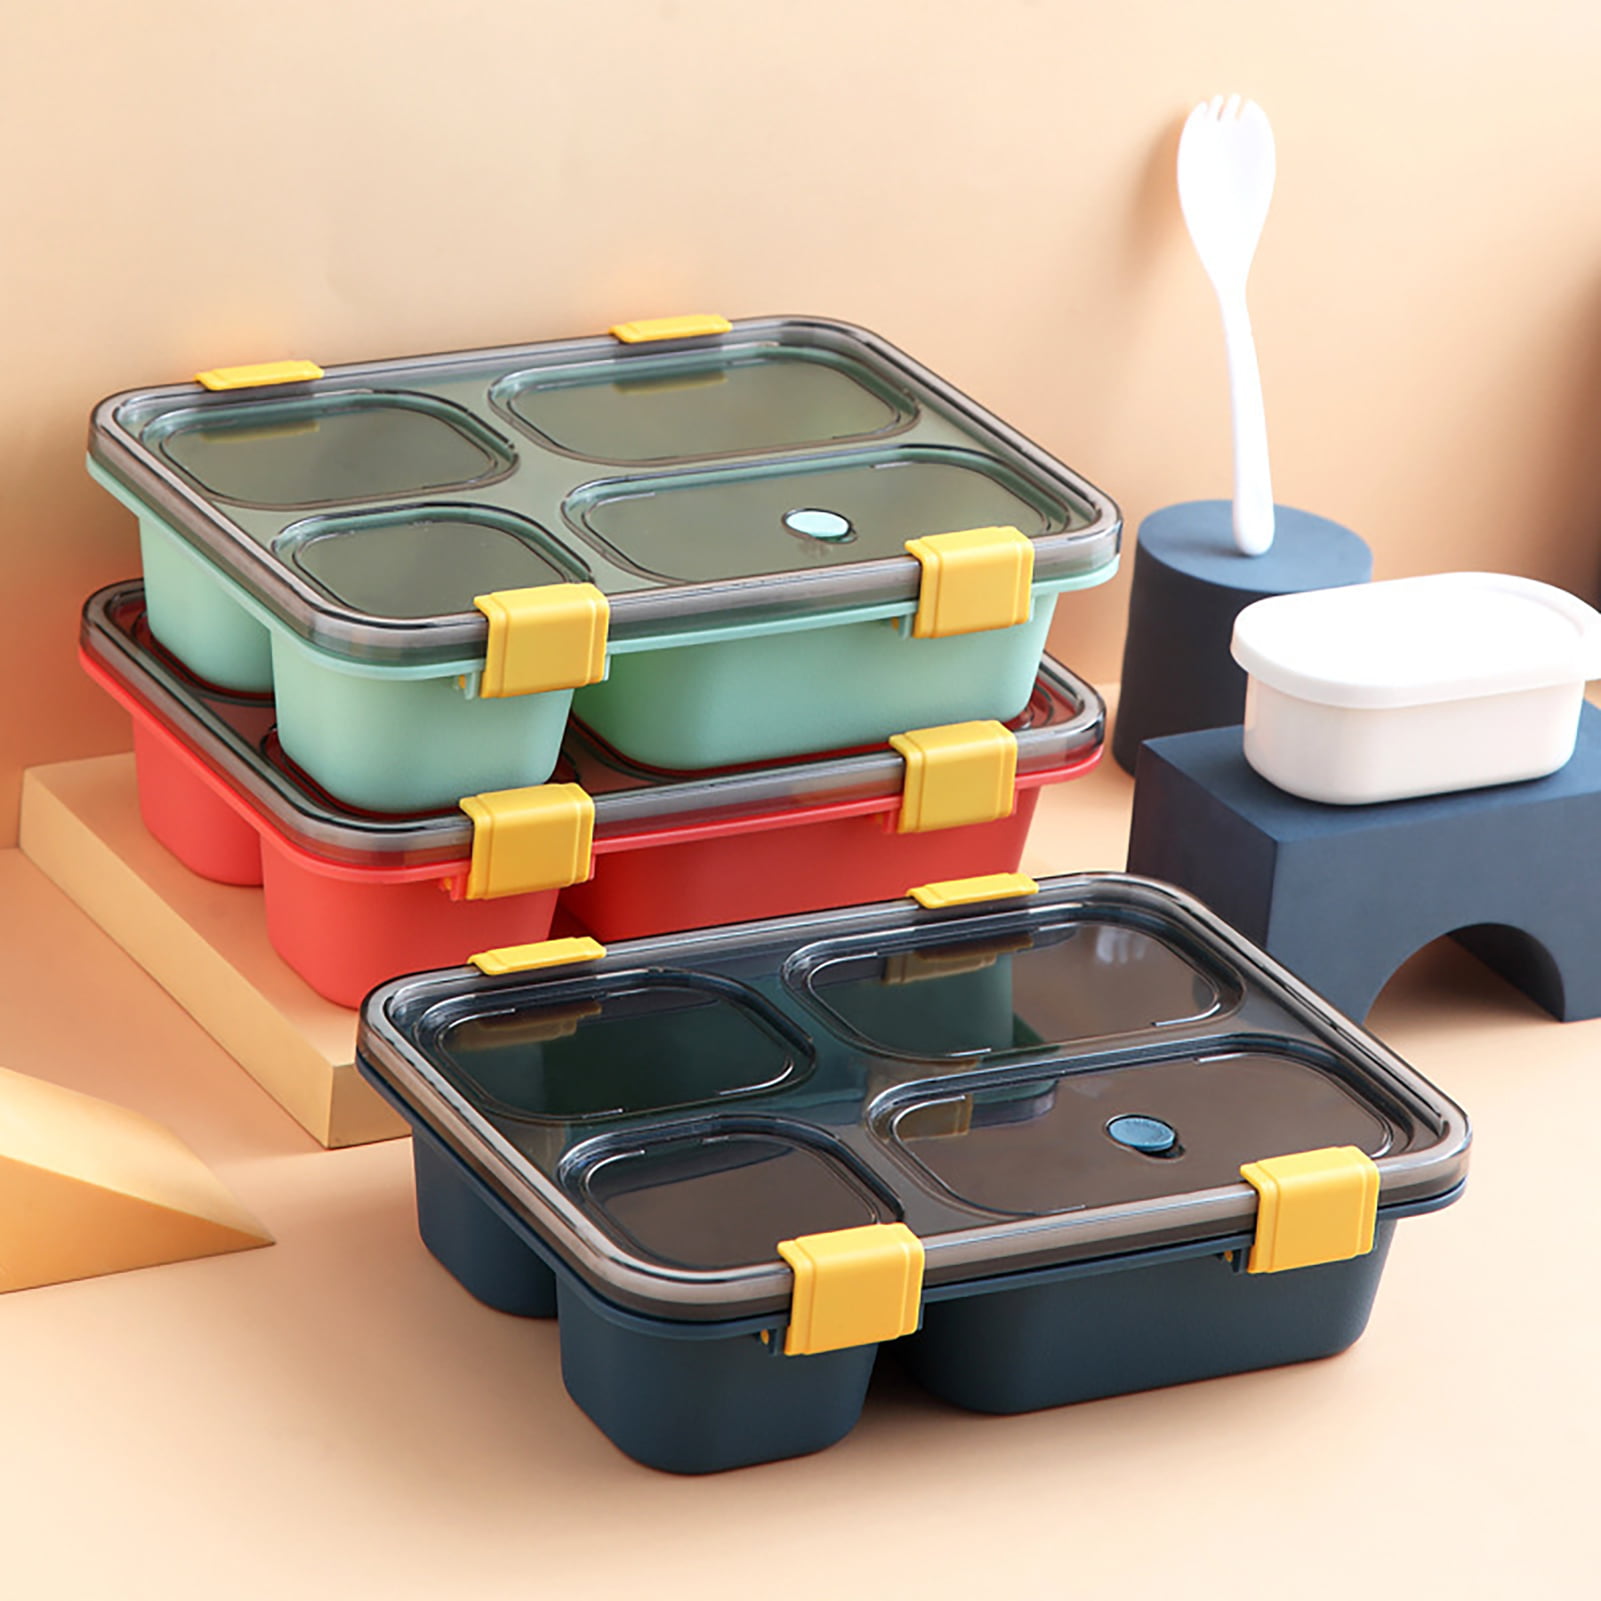 Wagindd Leak-Proof, BPA-Free Stacking Bento Box Lunch Box with 4  Microwave-Safe, Sealed Compartments for Kids and Adults